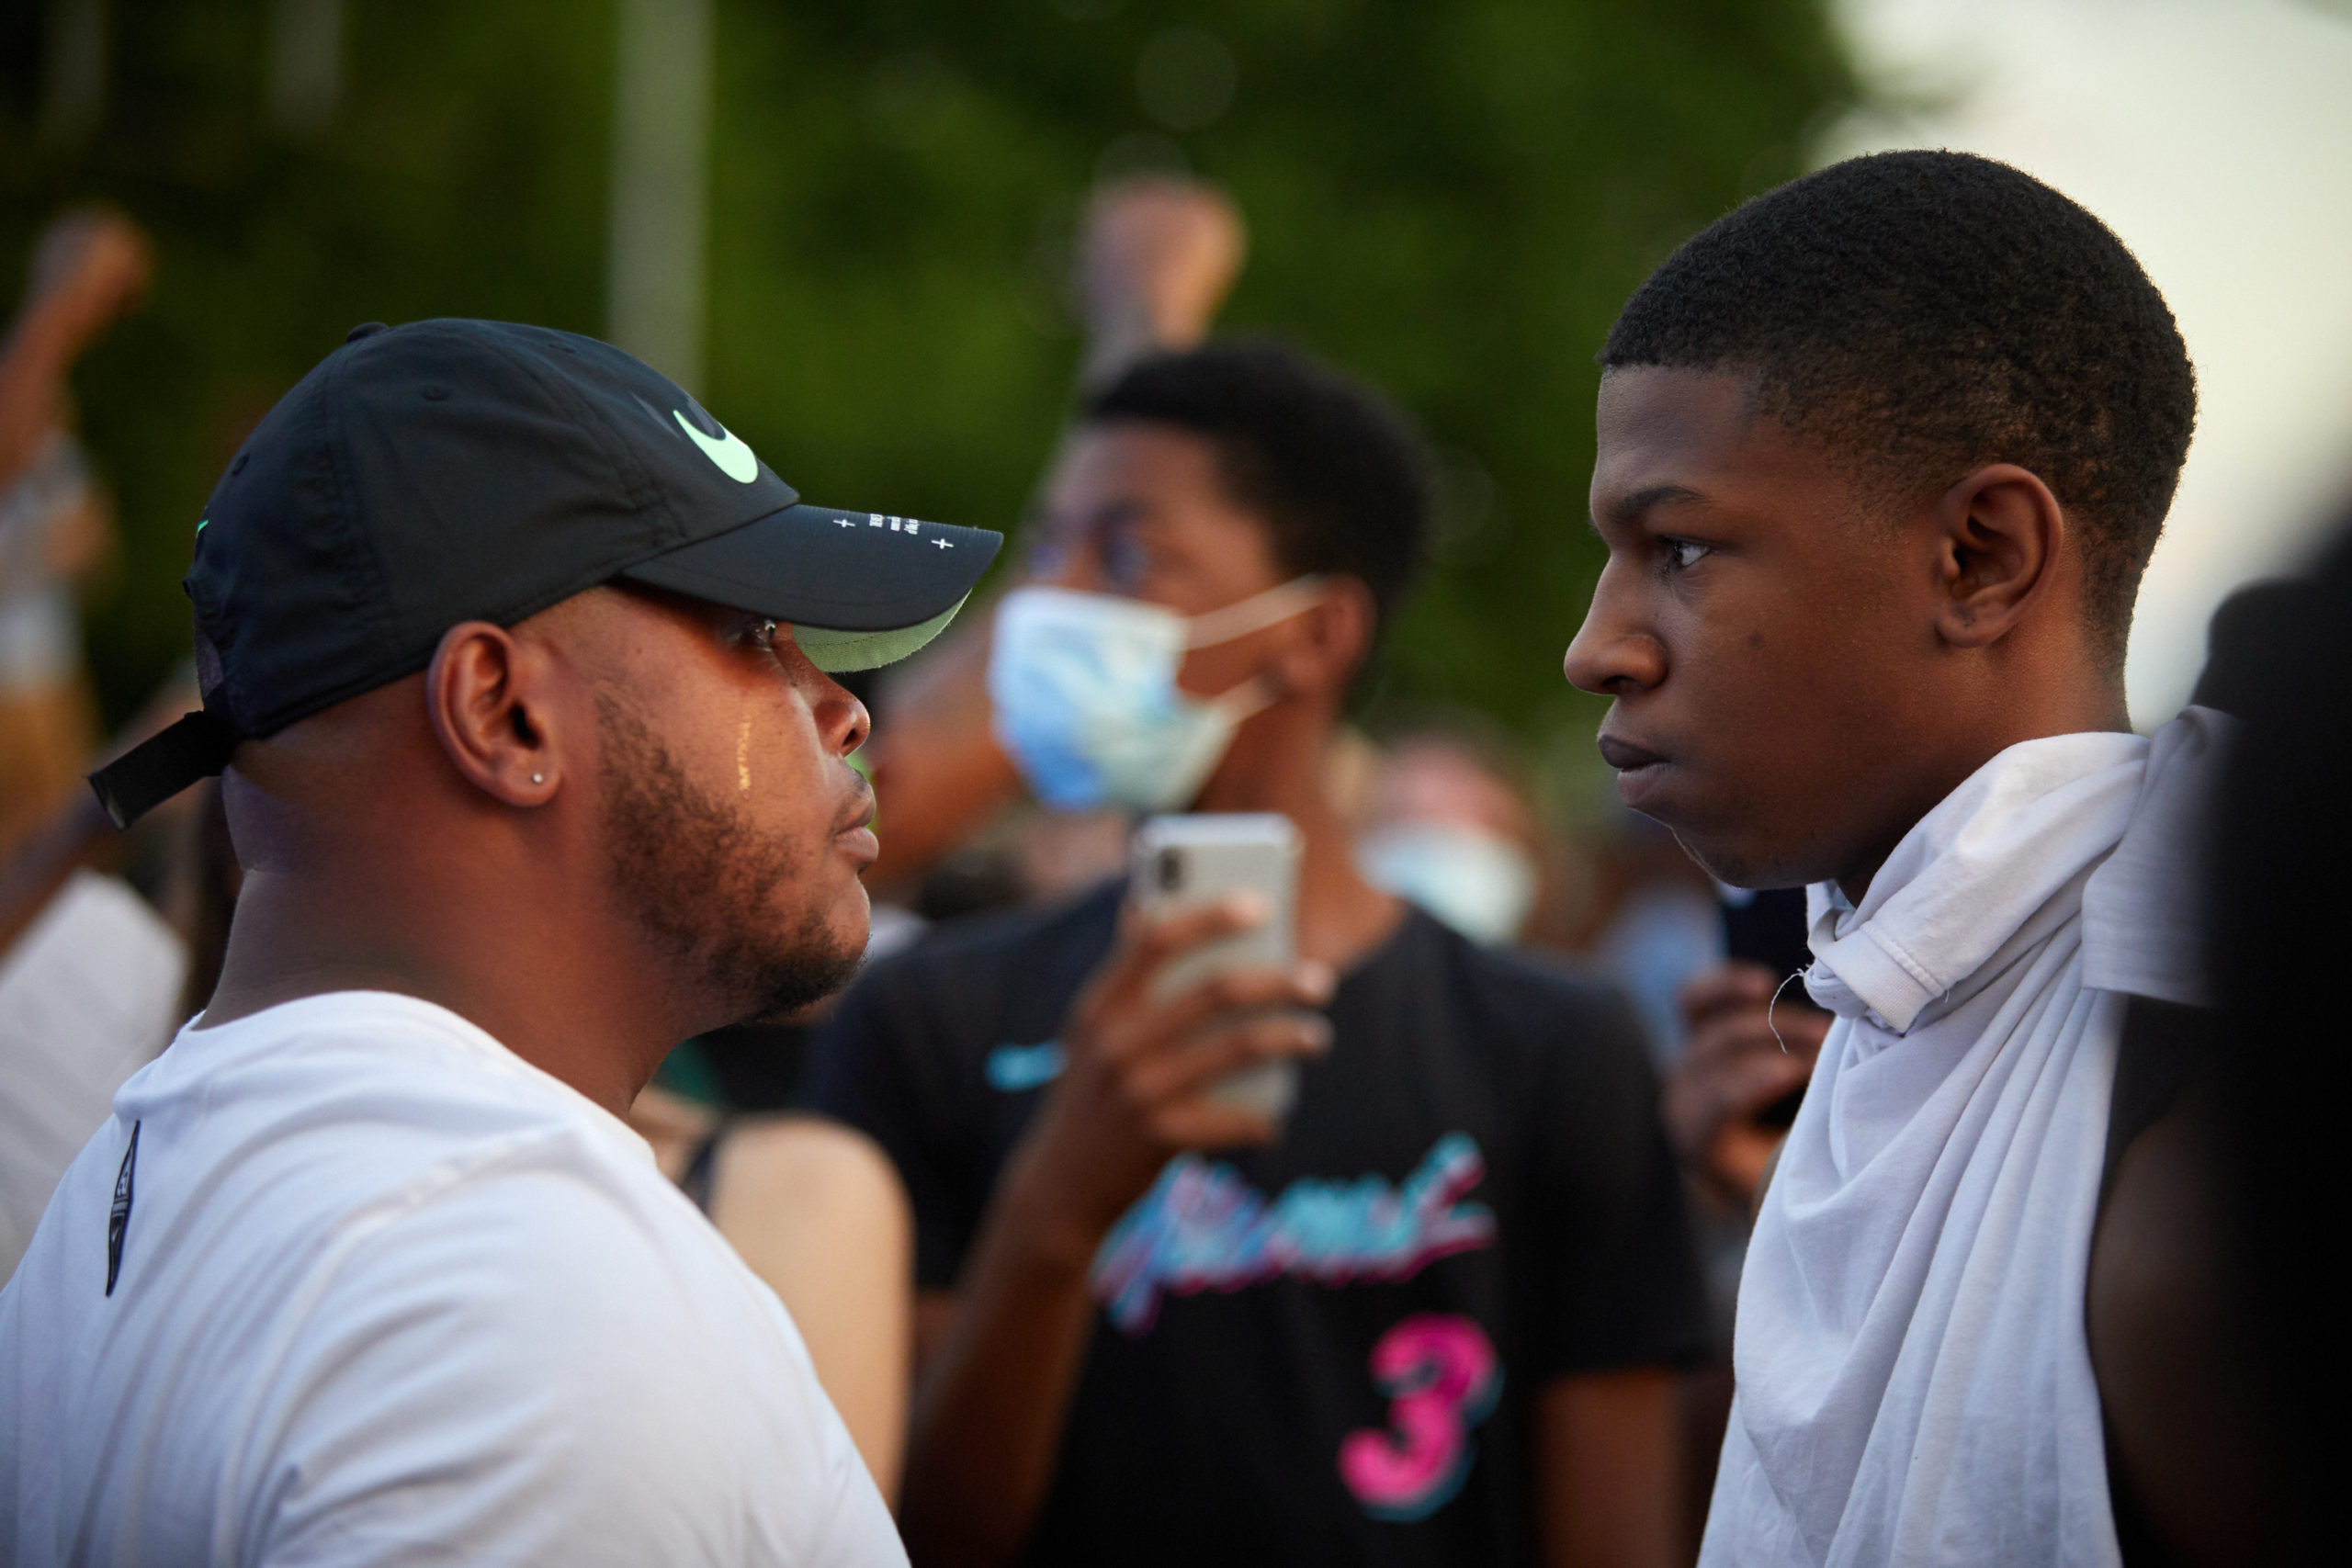 Photograph of two Black men in profile facing and talking to one another.